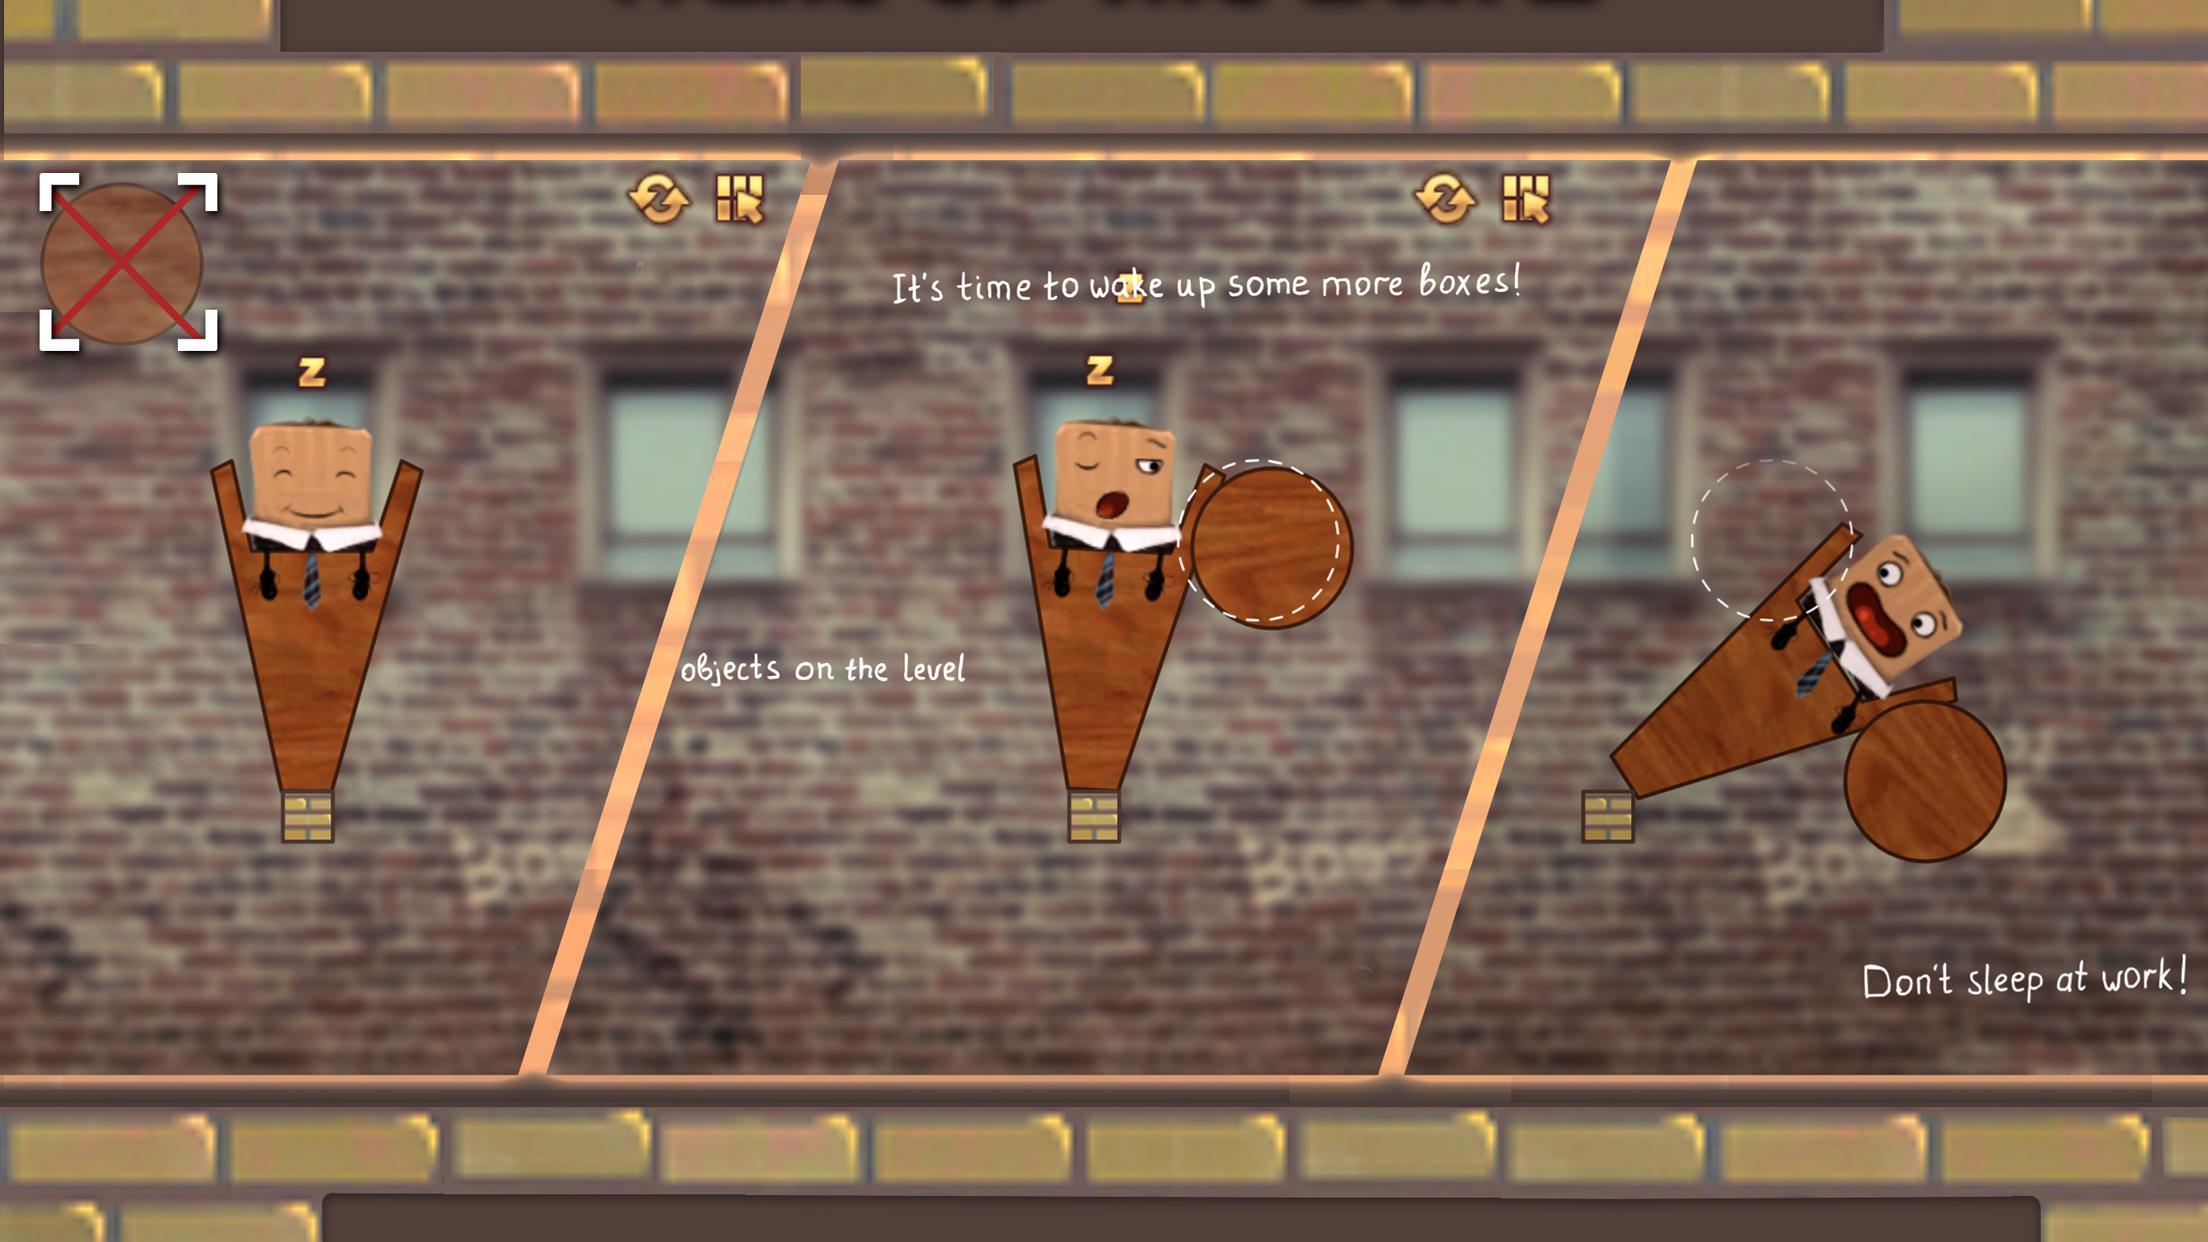 Wake Up the Box 2 for Android - APK Download